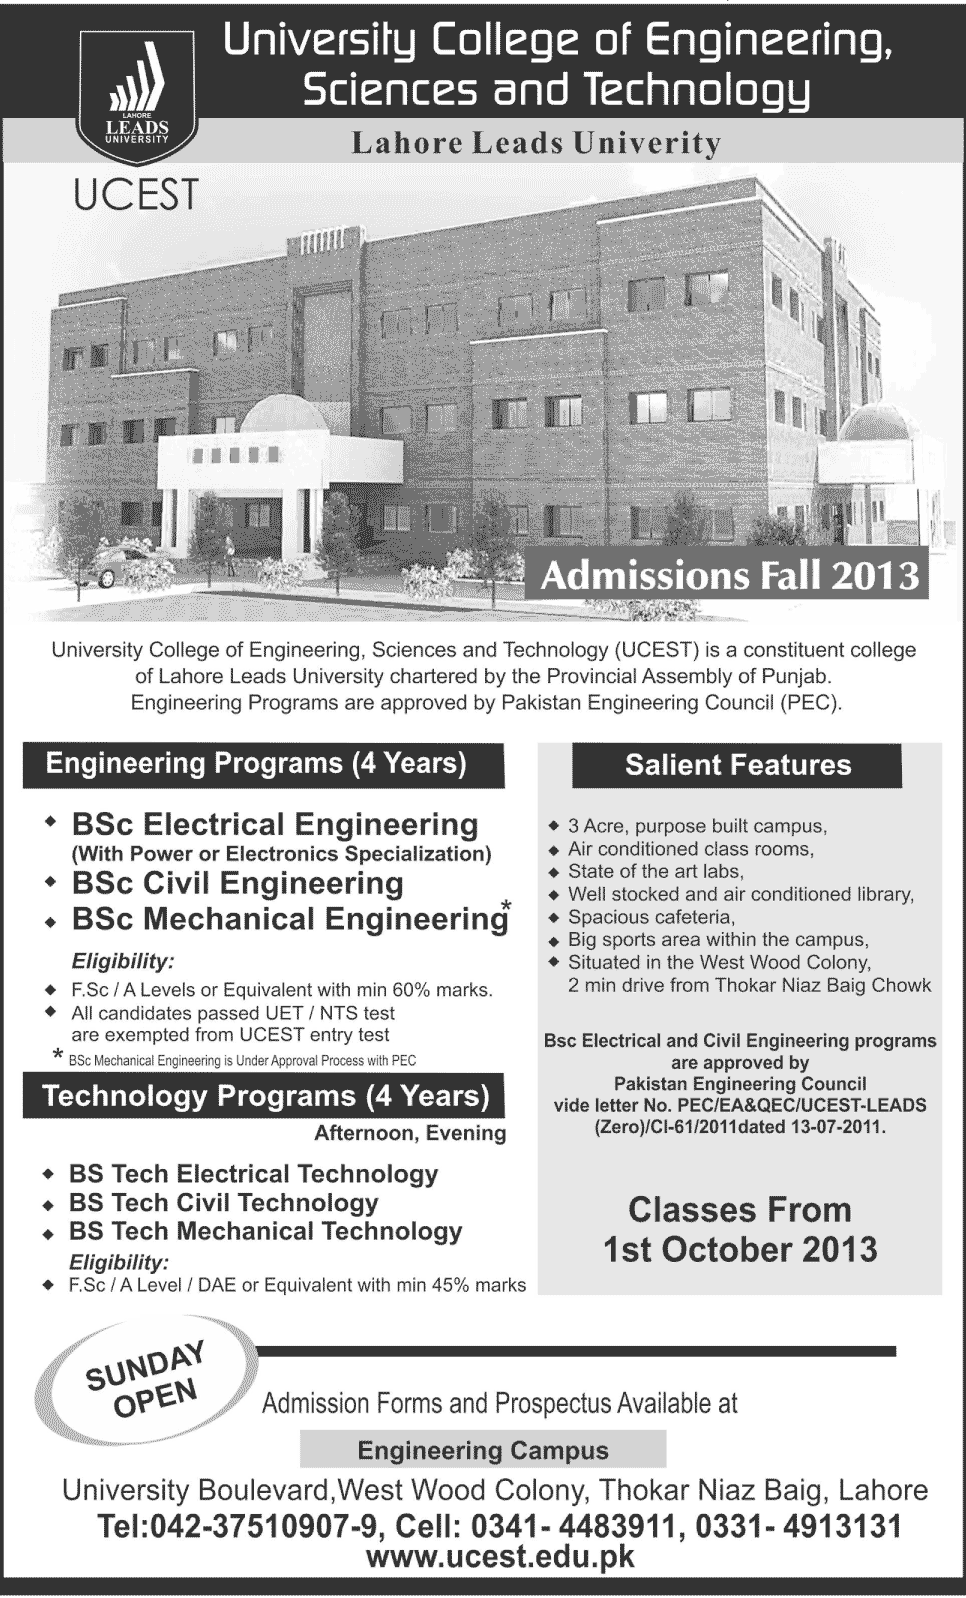 Lahore Leads University Engineering & Technology Programs Admissions 2013